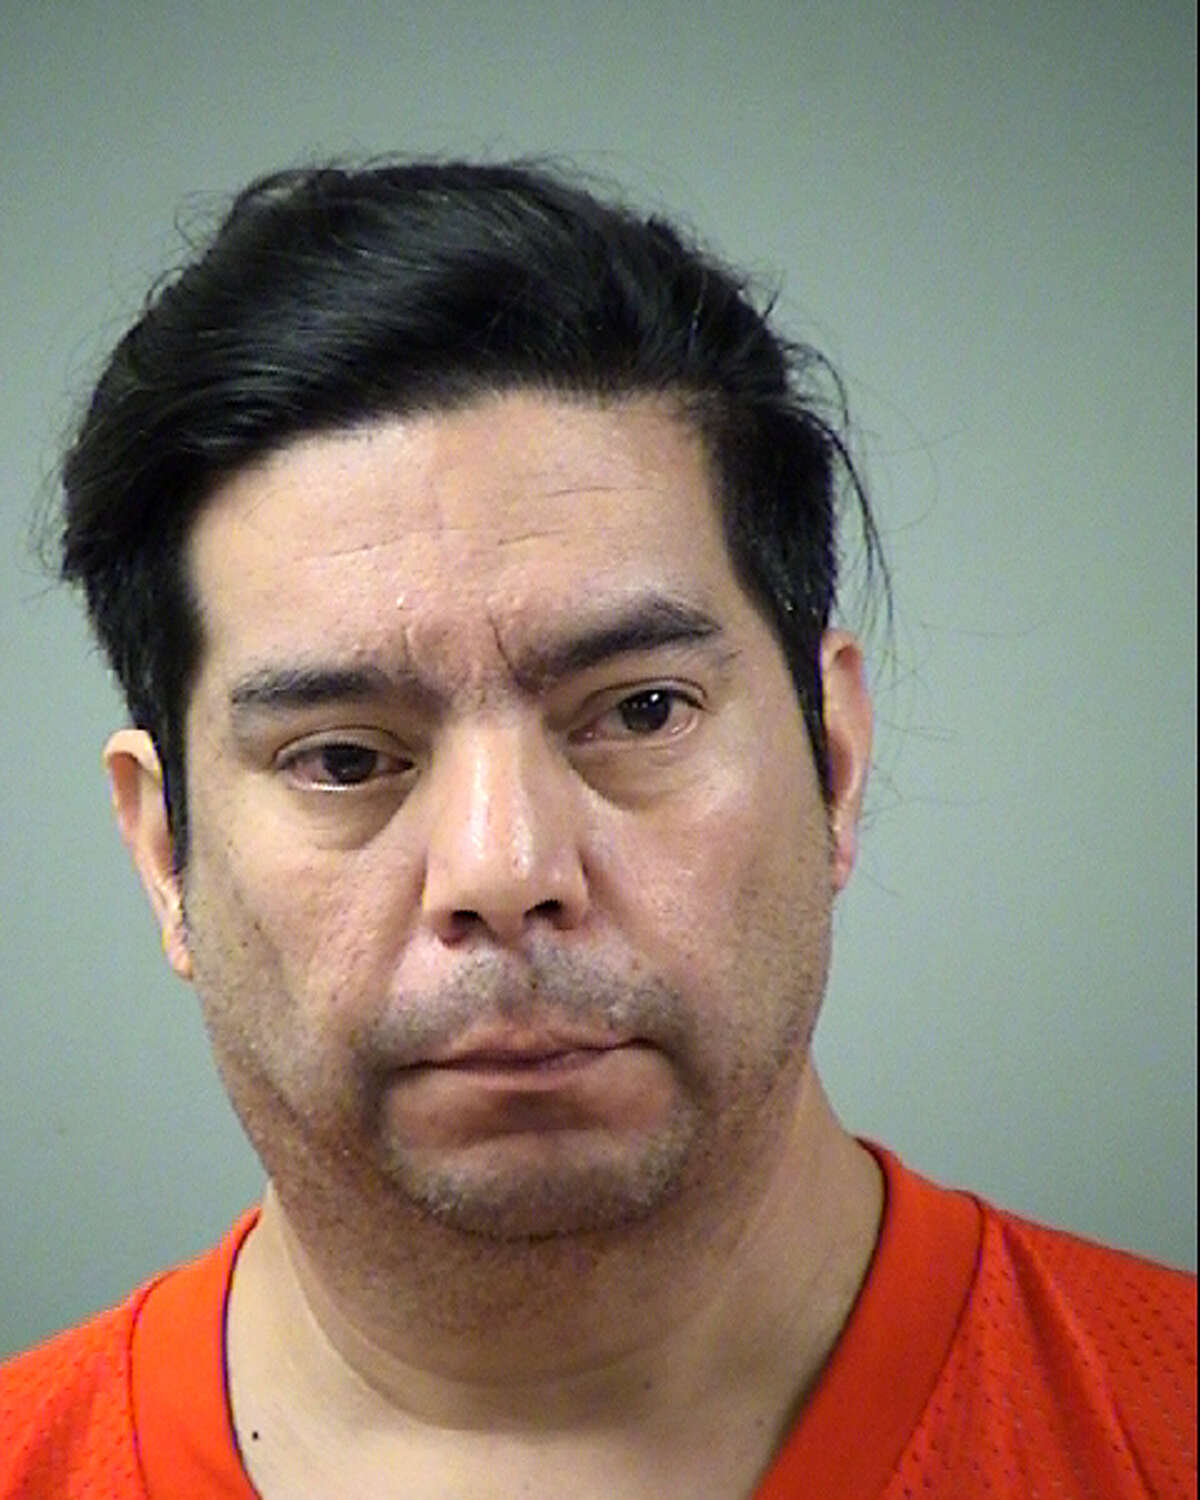 Fred Cerna is suspected of evading a San Antonio police officer who was attempting to stop him on suspicion of driving while intoxicated.